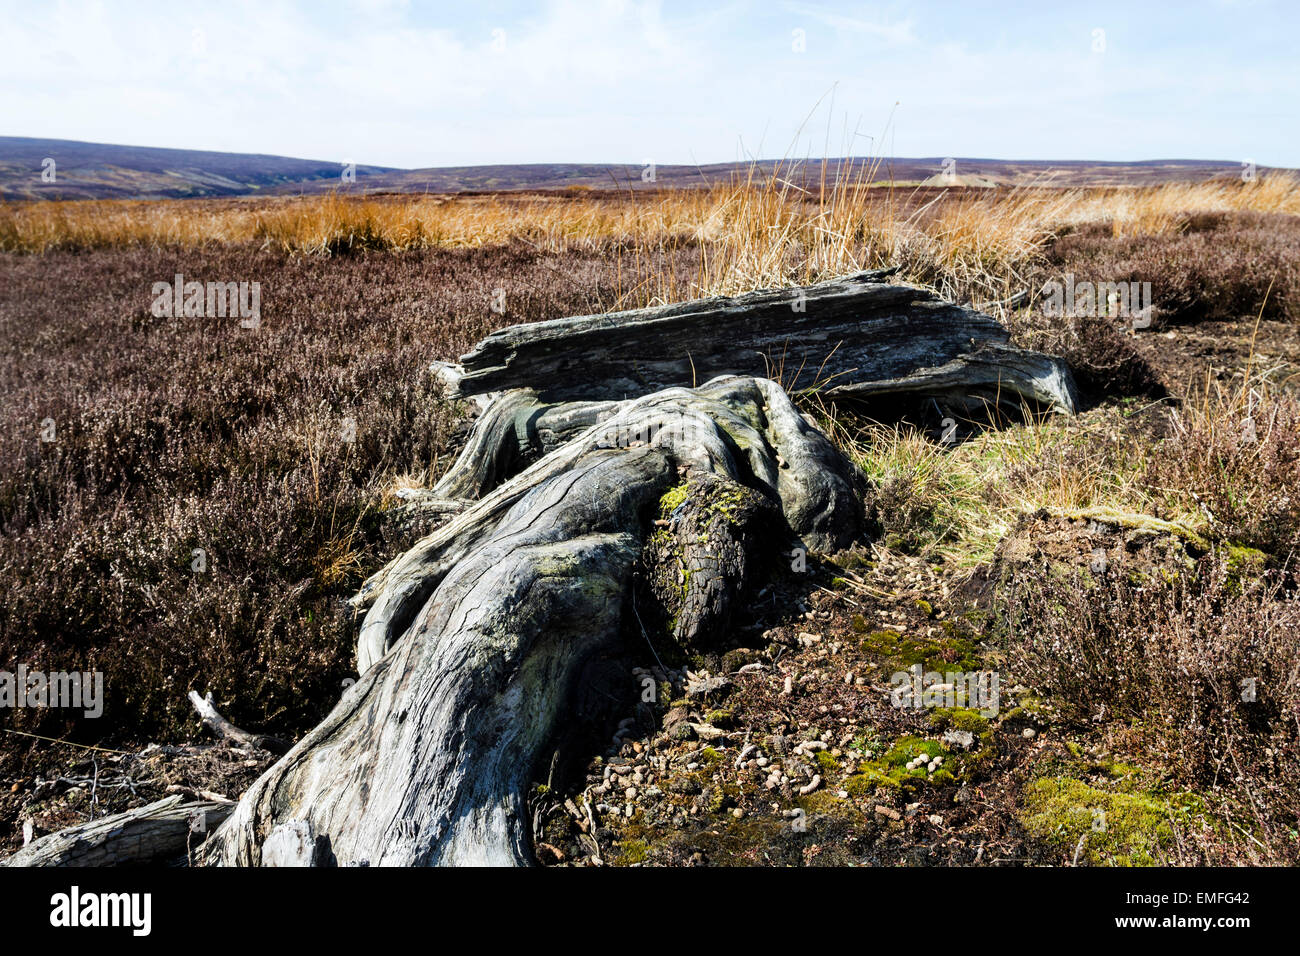 Ancient Tree Stumps Remnants of the Ancient Forests That Once Covered The North Pennine Hills in County Durham England UK Stock Photo